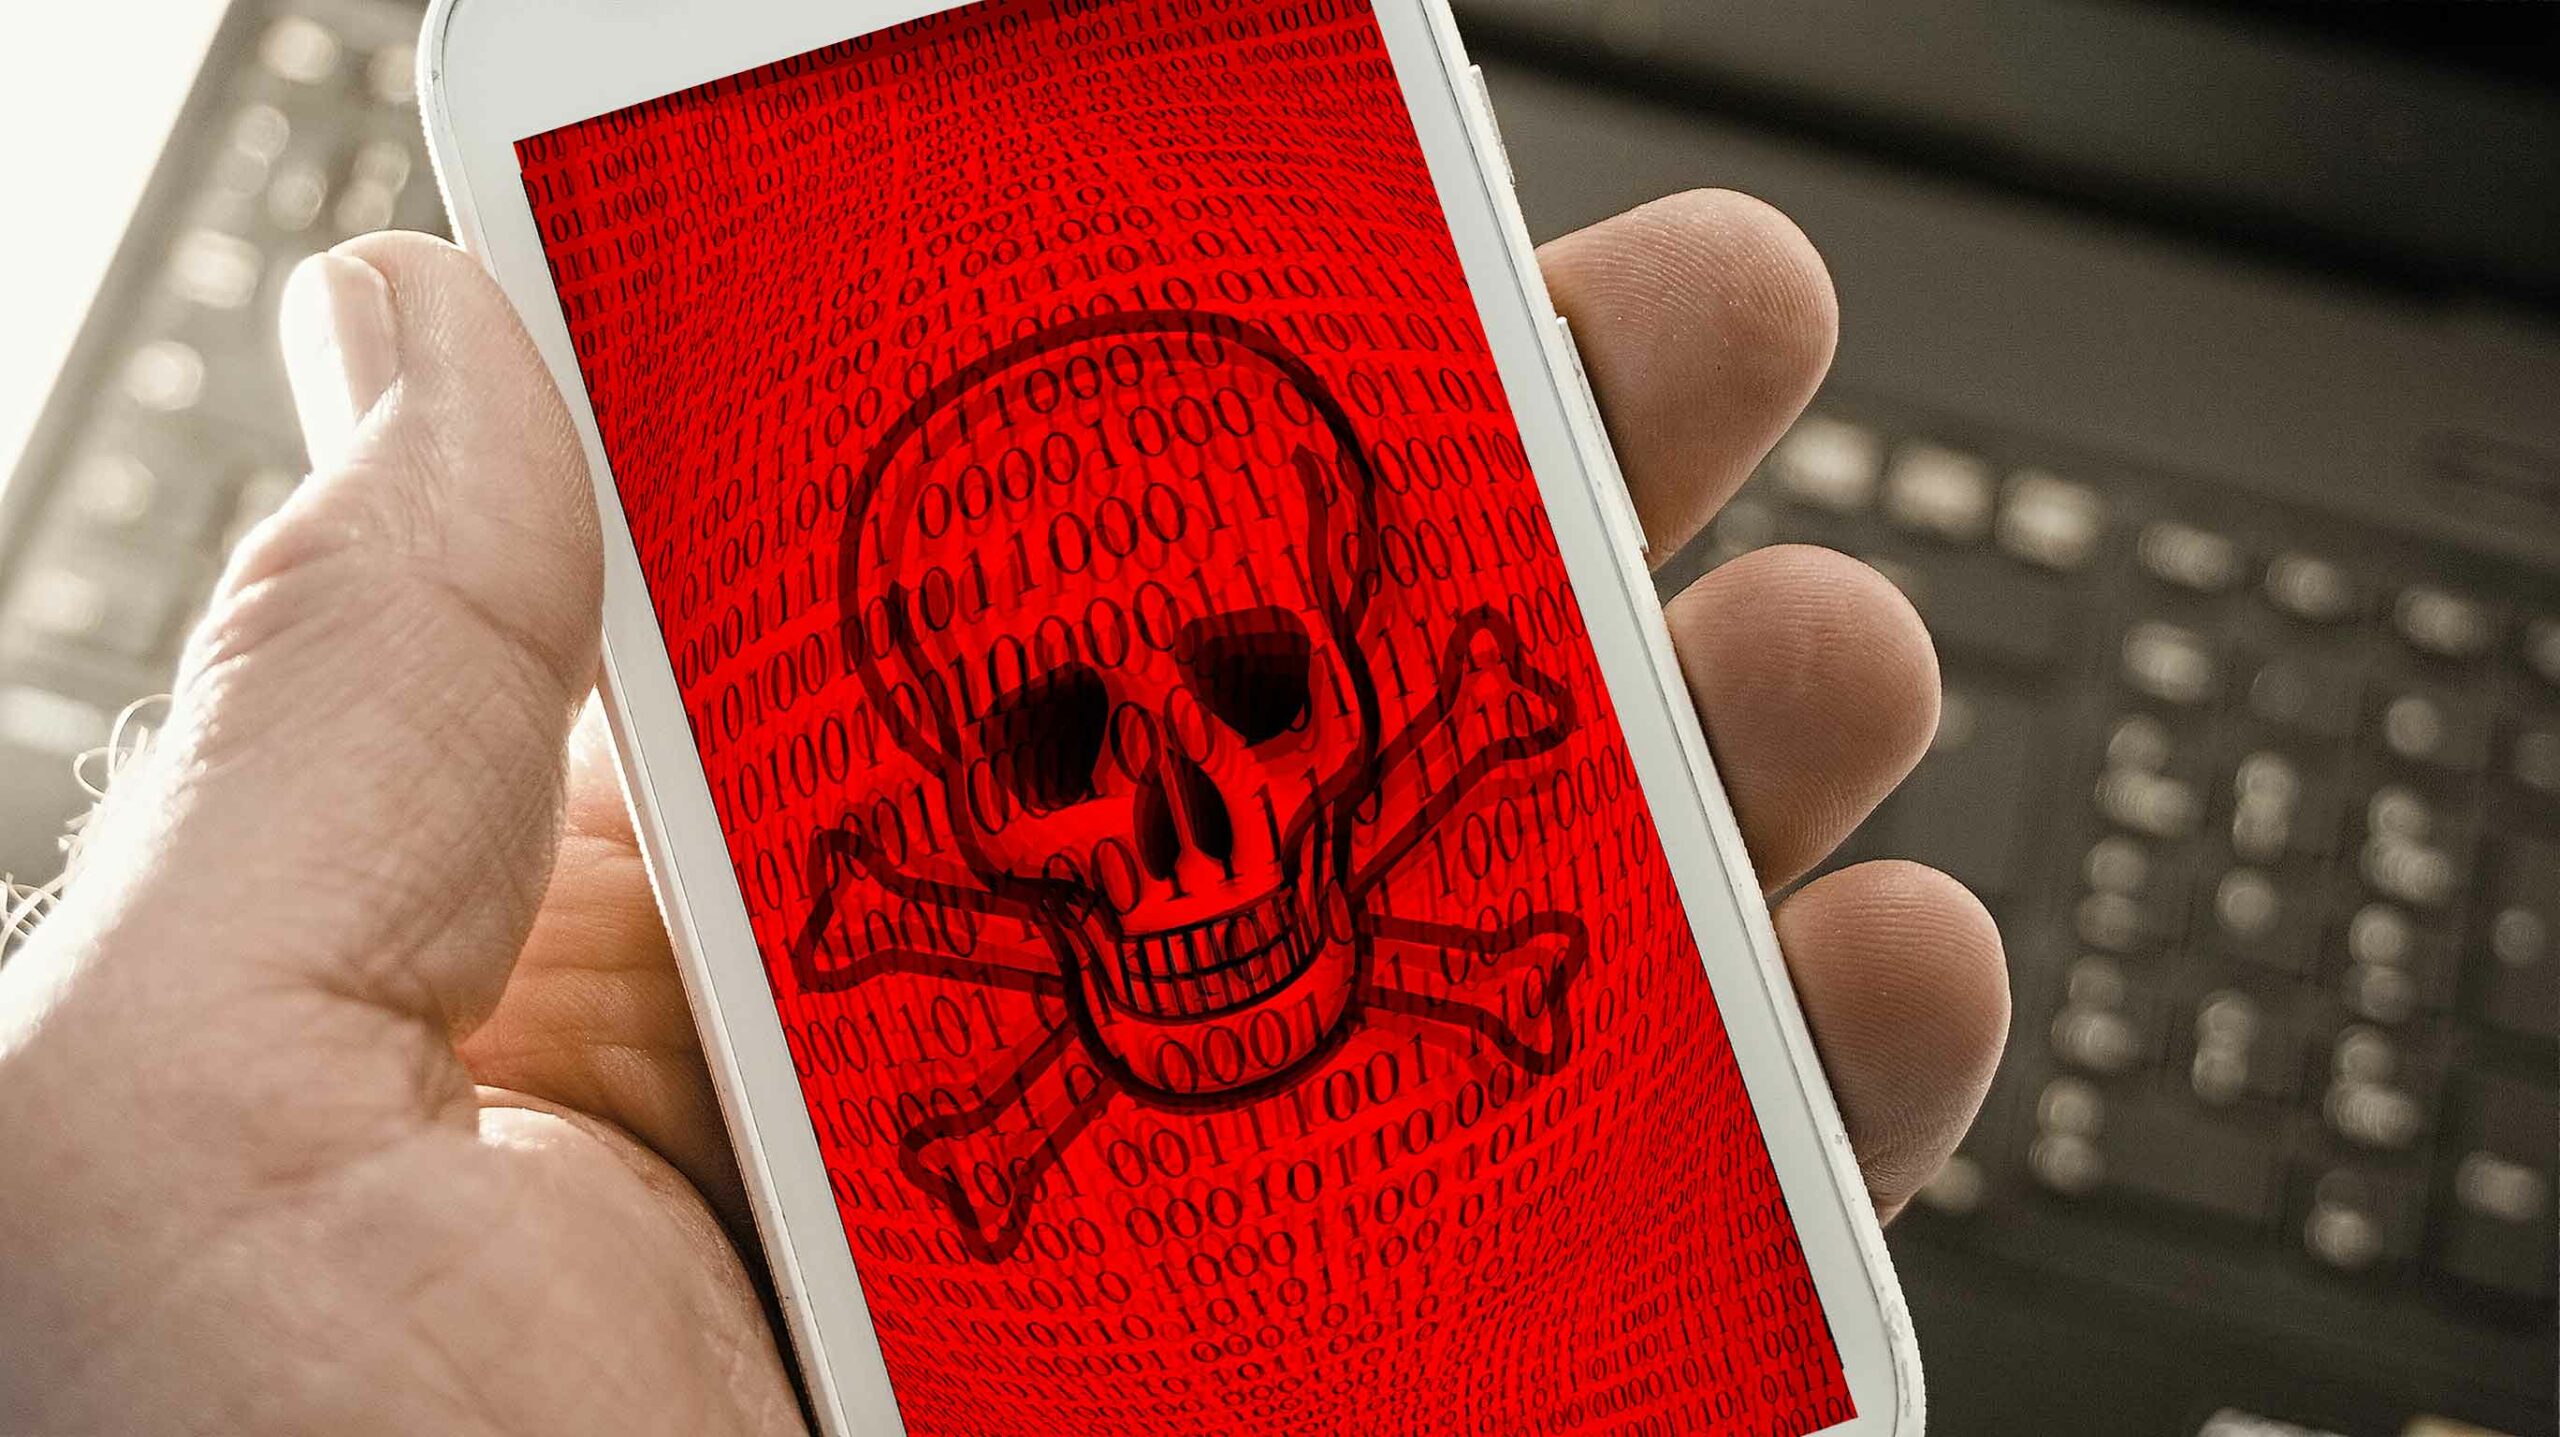 This Play Store malware was downloaded over 420 million times thumbnail